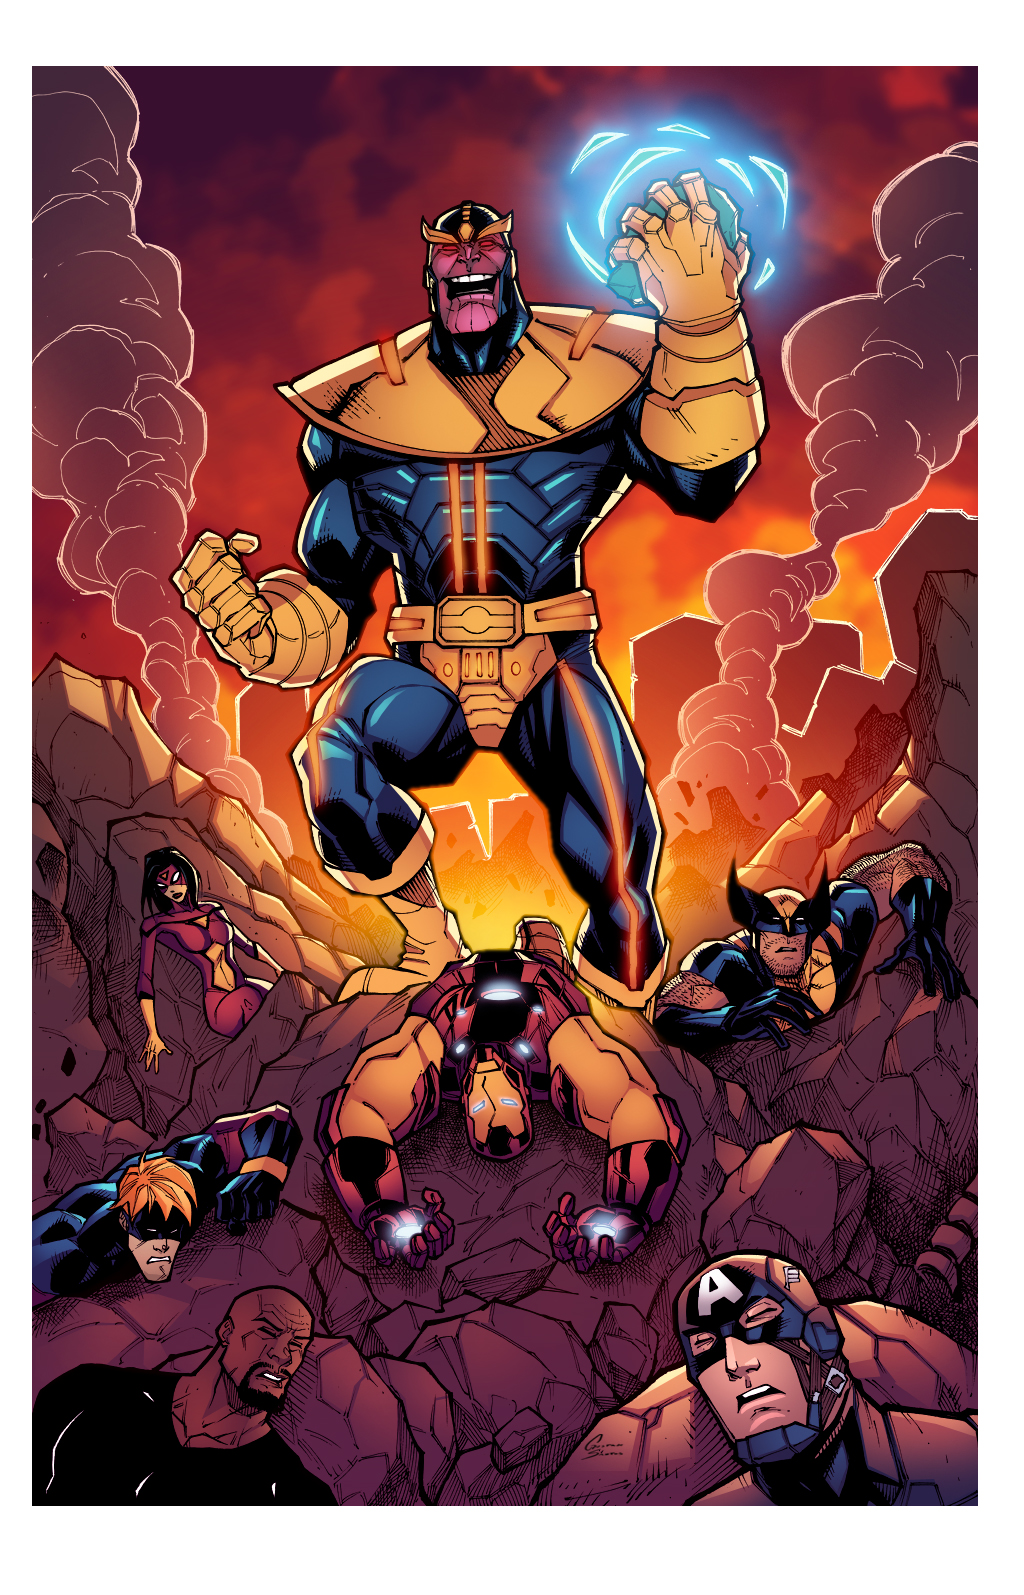 Avengers Page 1 (Avengers vs Thanos) by GustavoSantos01 on DeviantArt